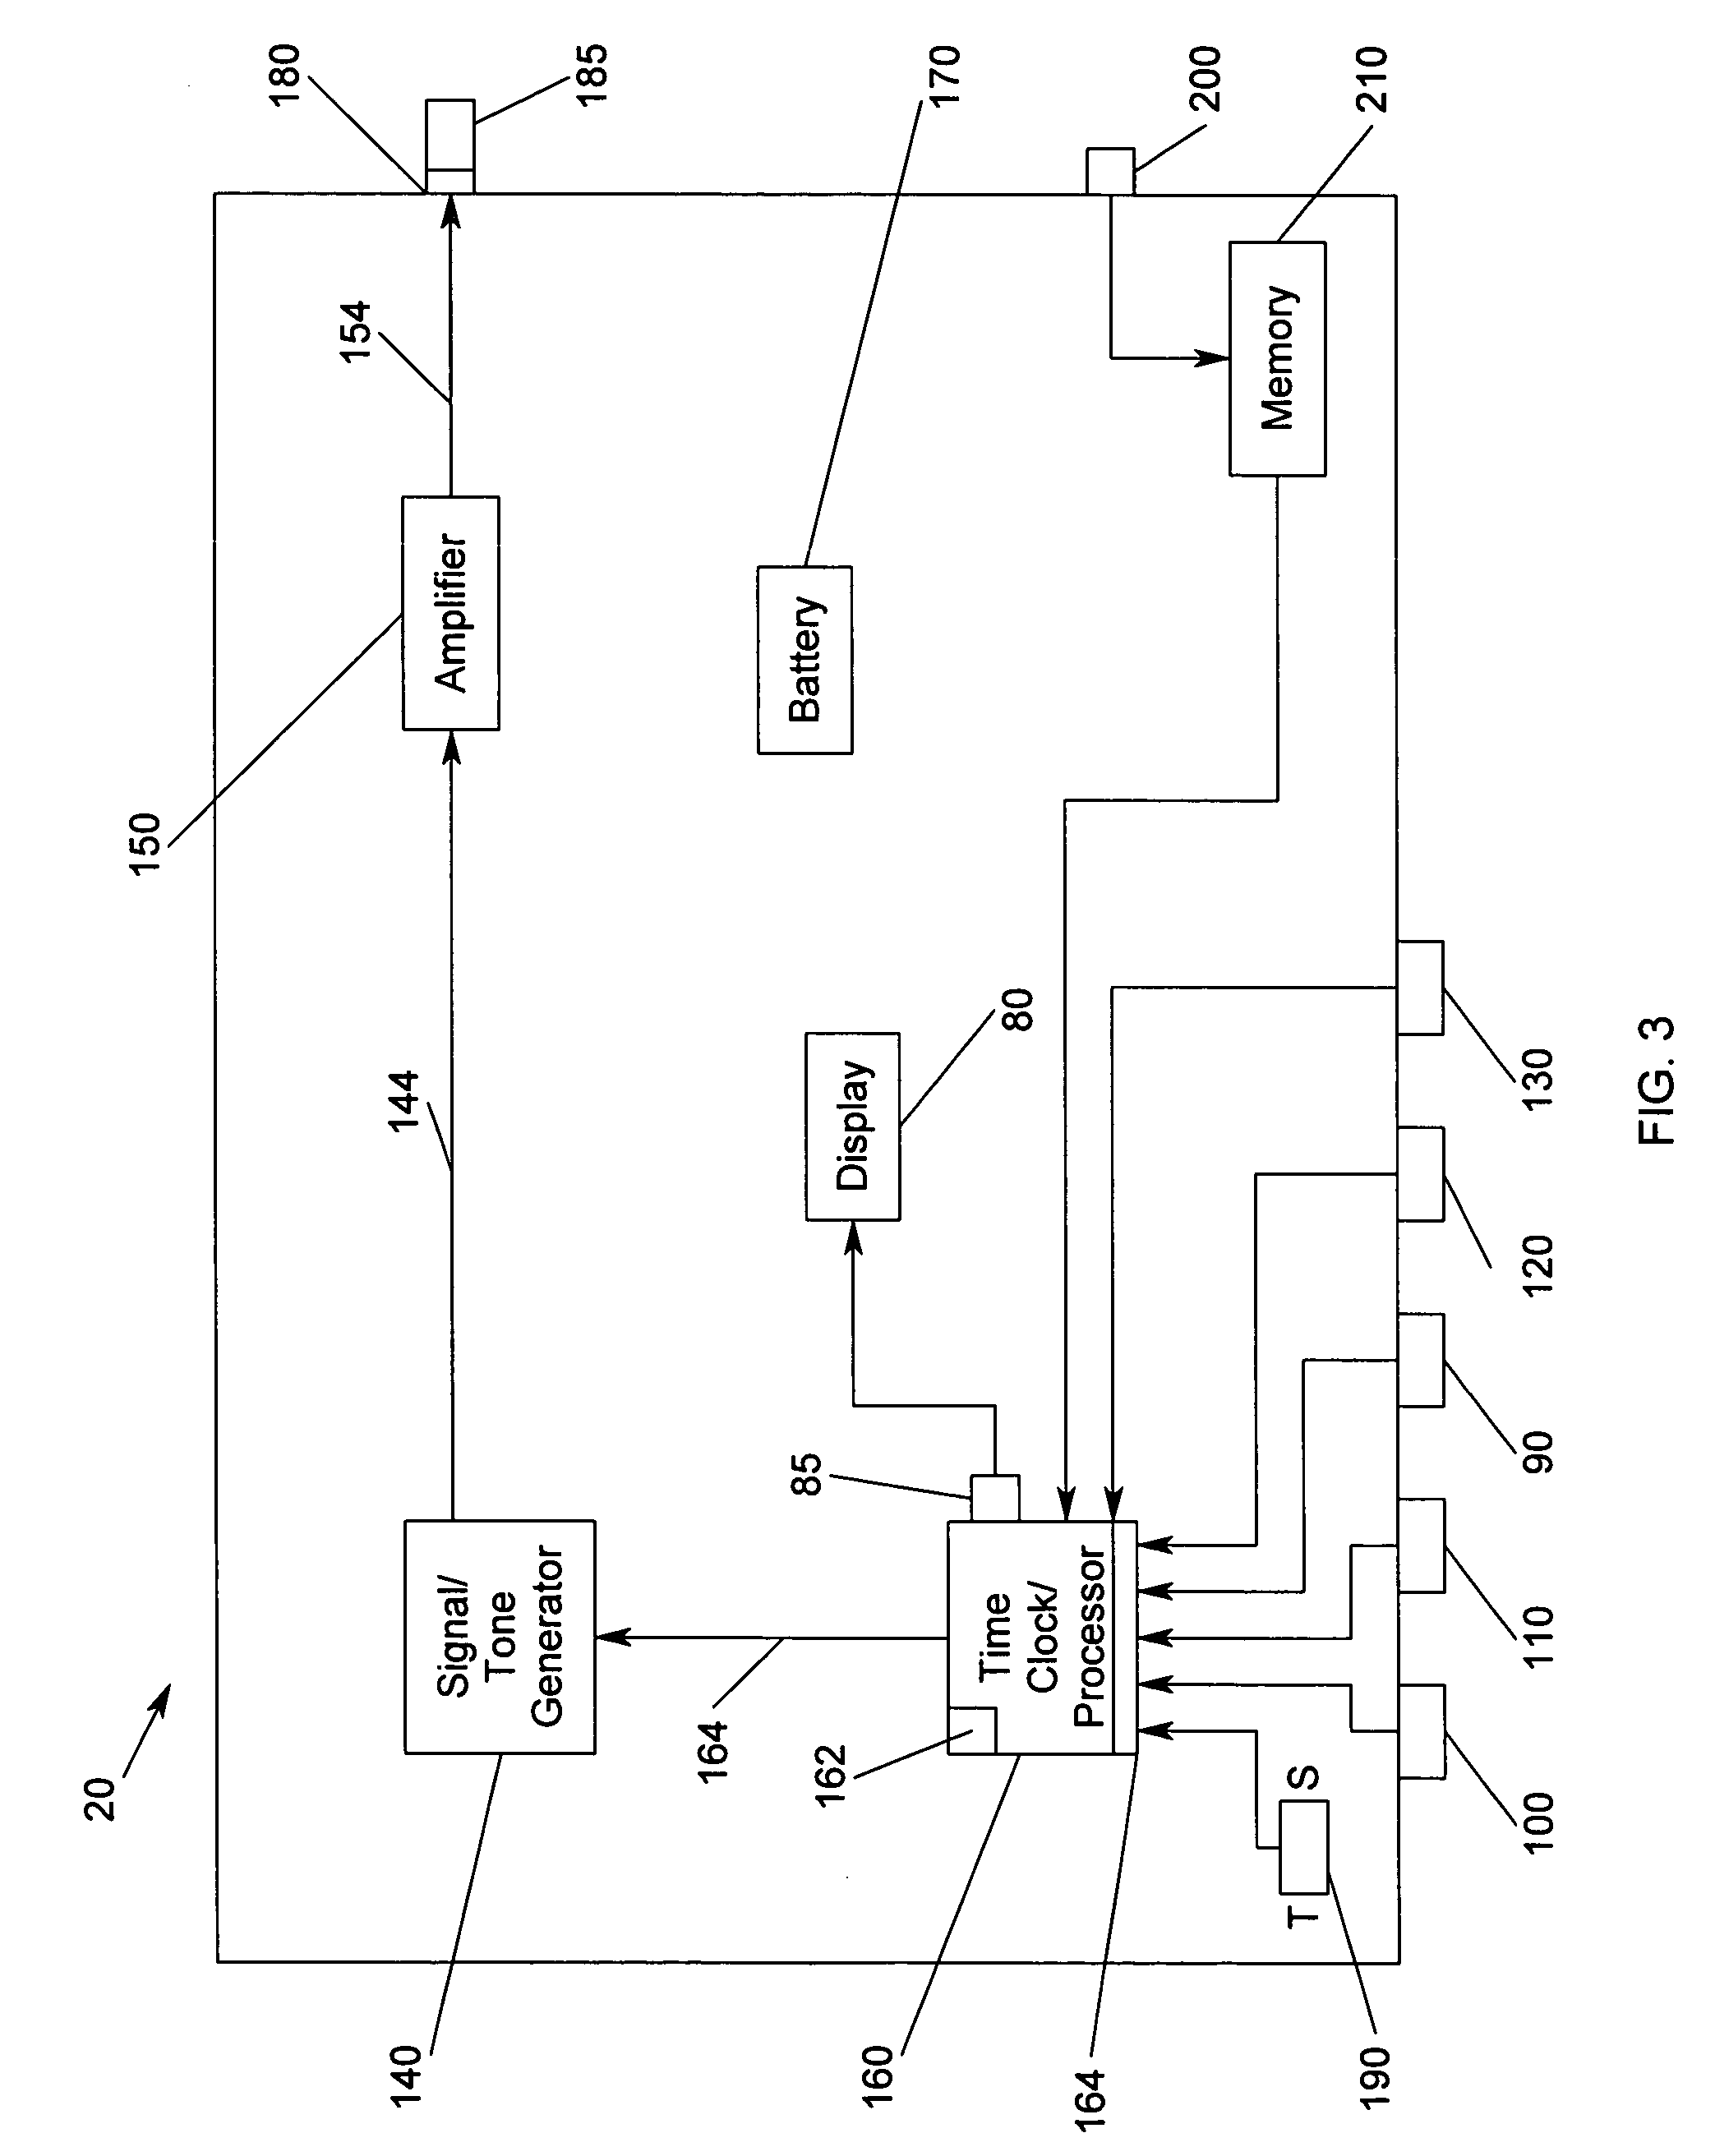 Discreet bed-wetting alarm and method of use thereof